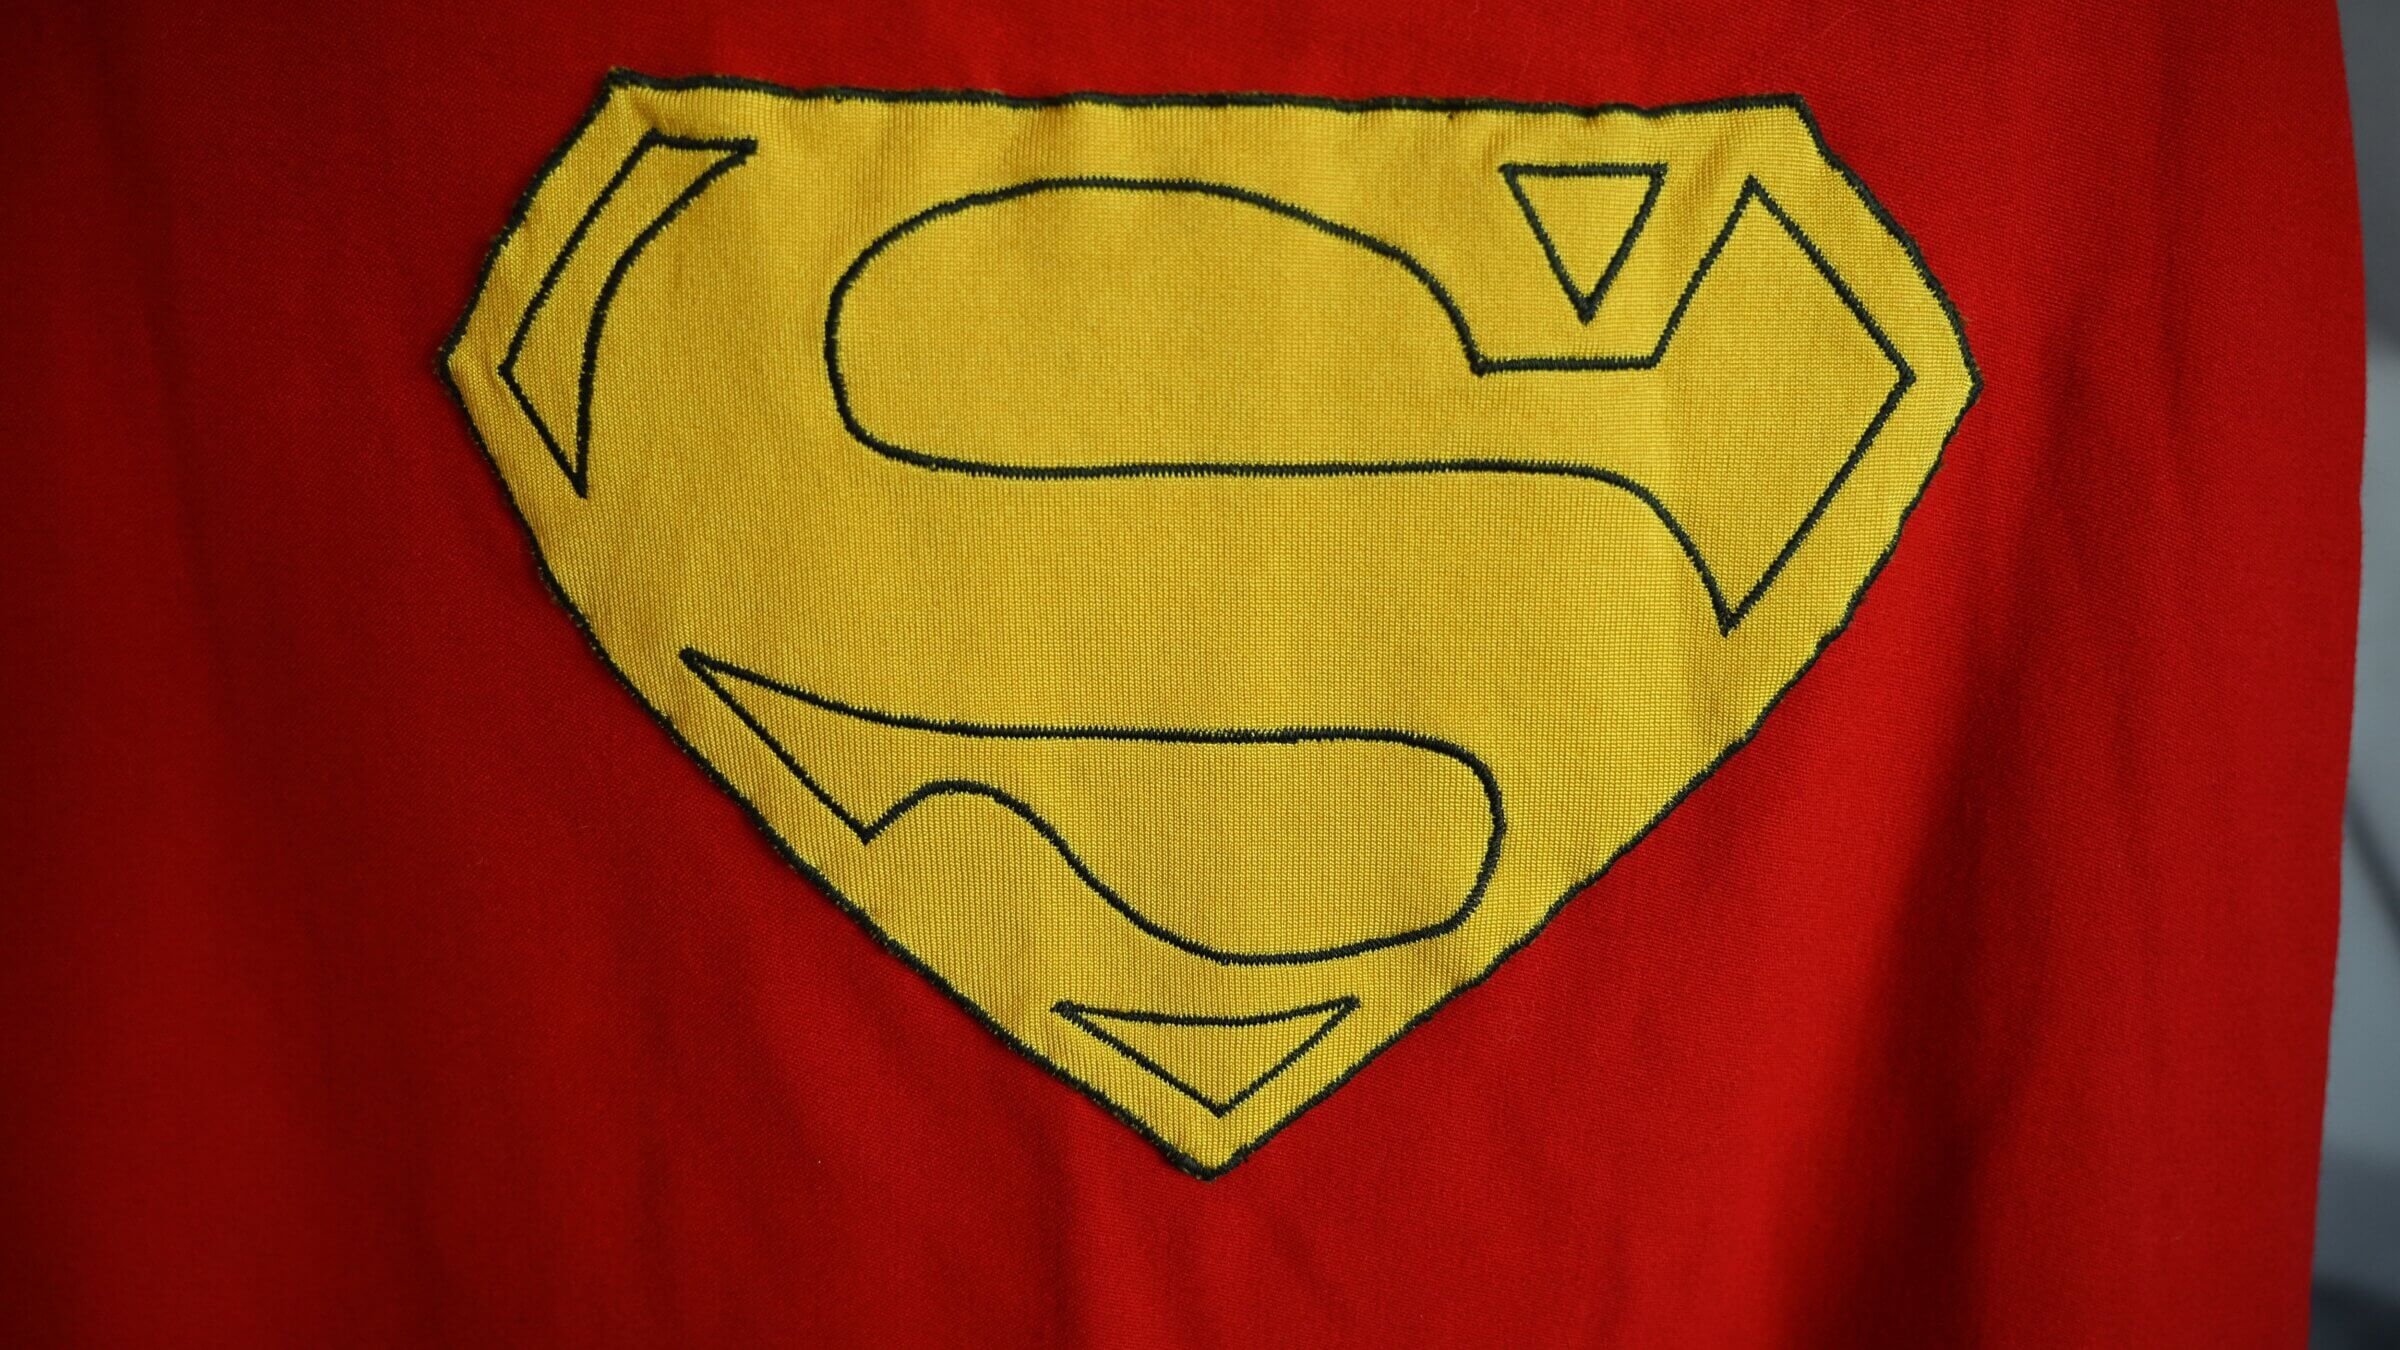 In June 1938, a caped crusader (whose outfit seen above was worn by Christopher Reeve) was born.